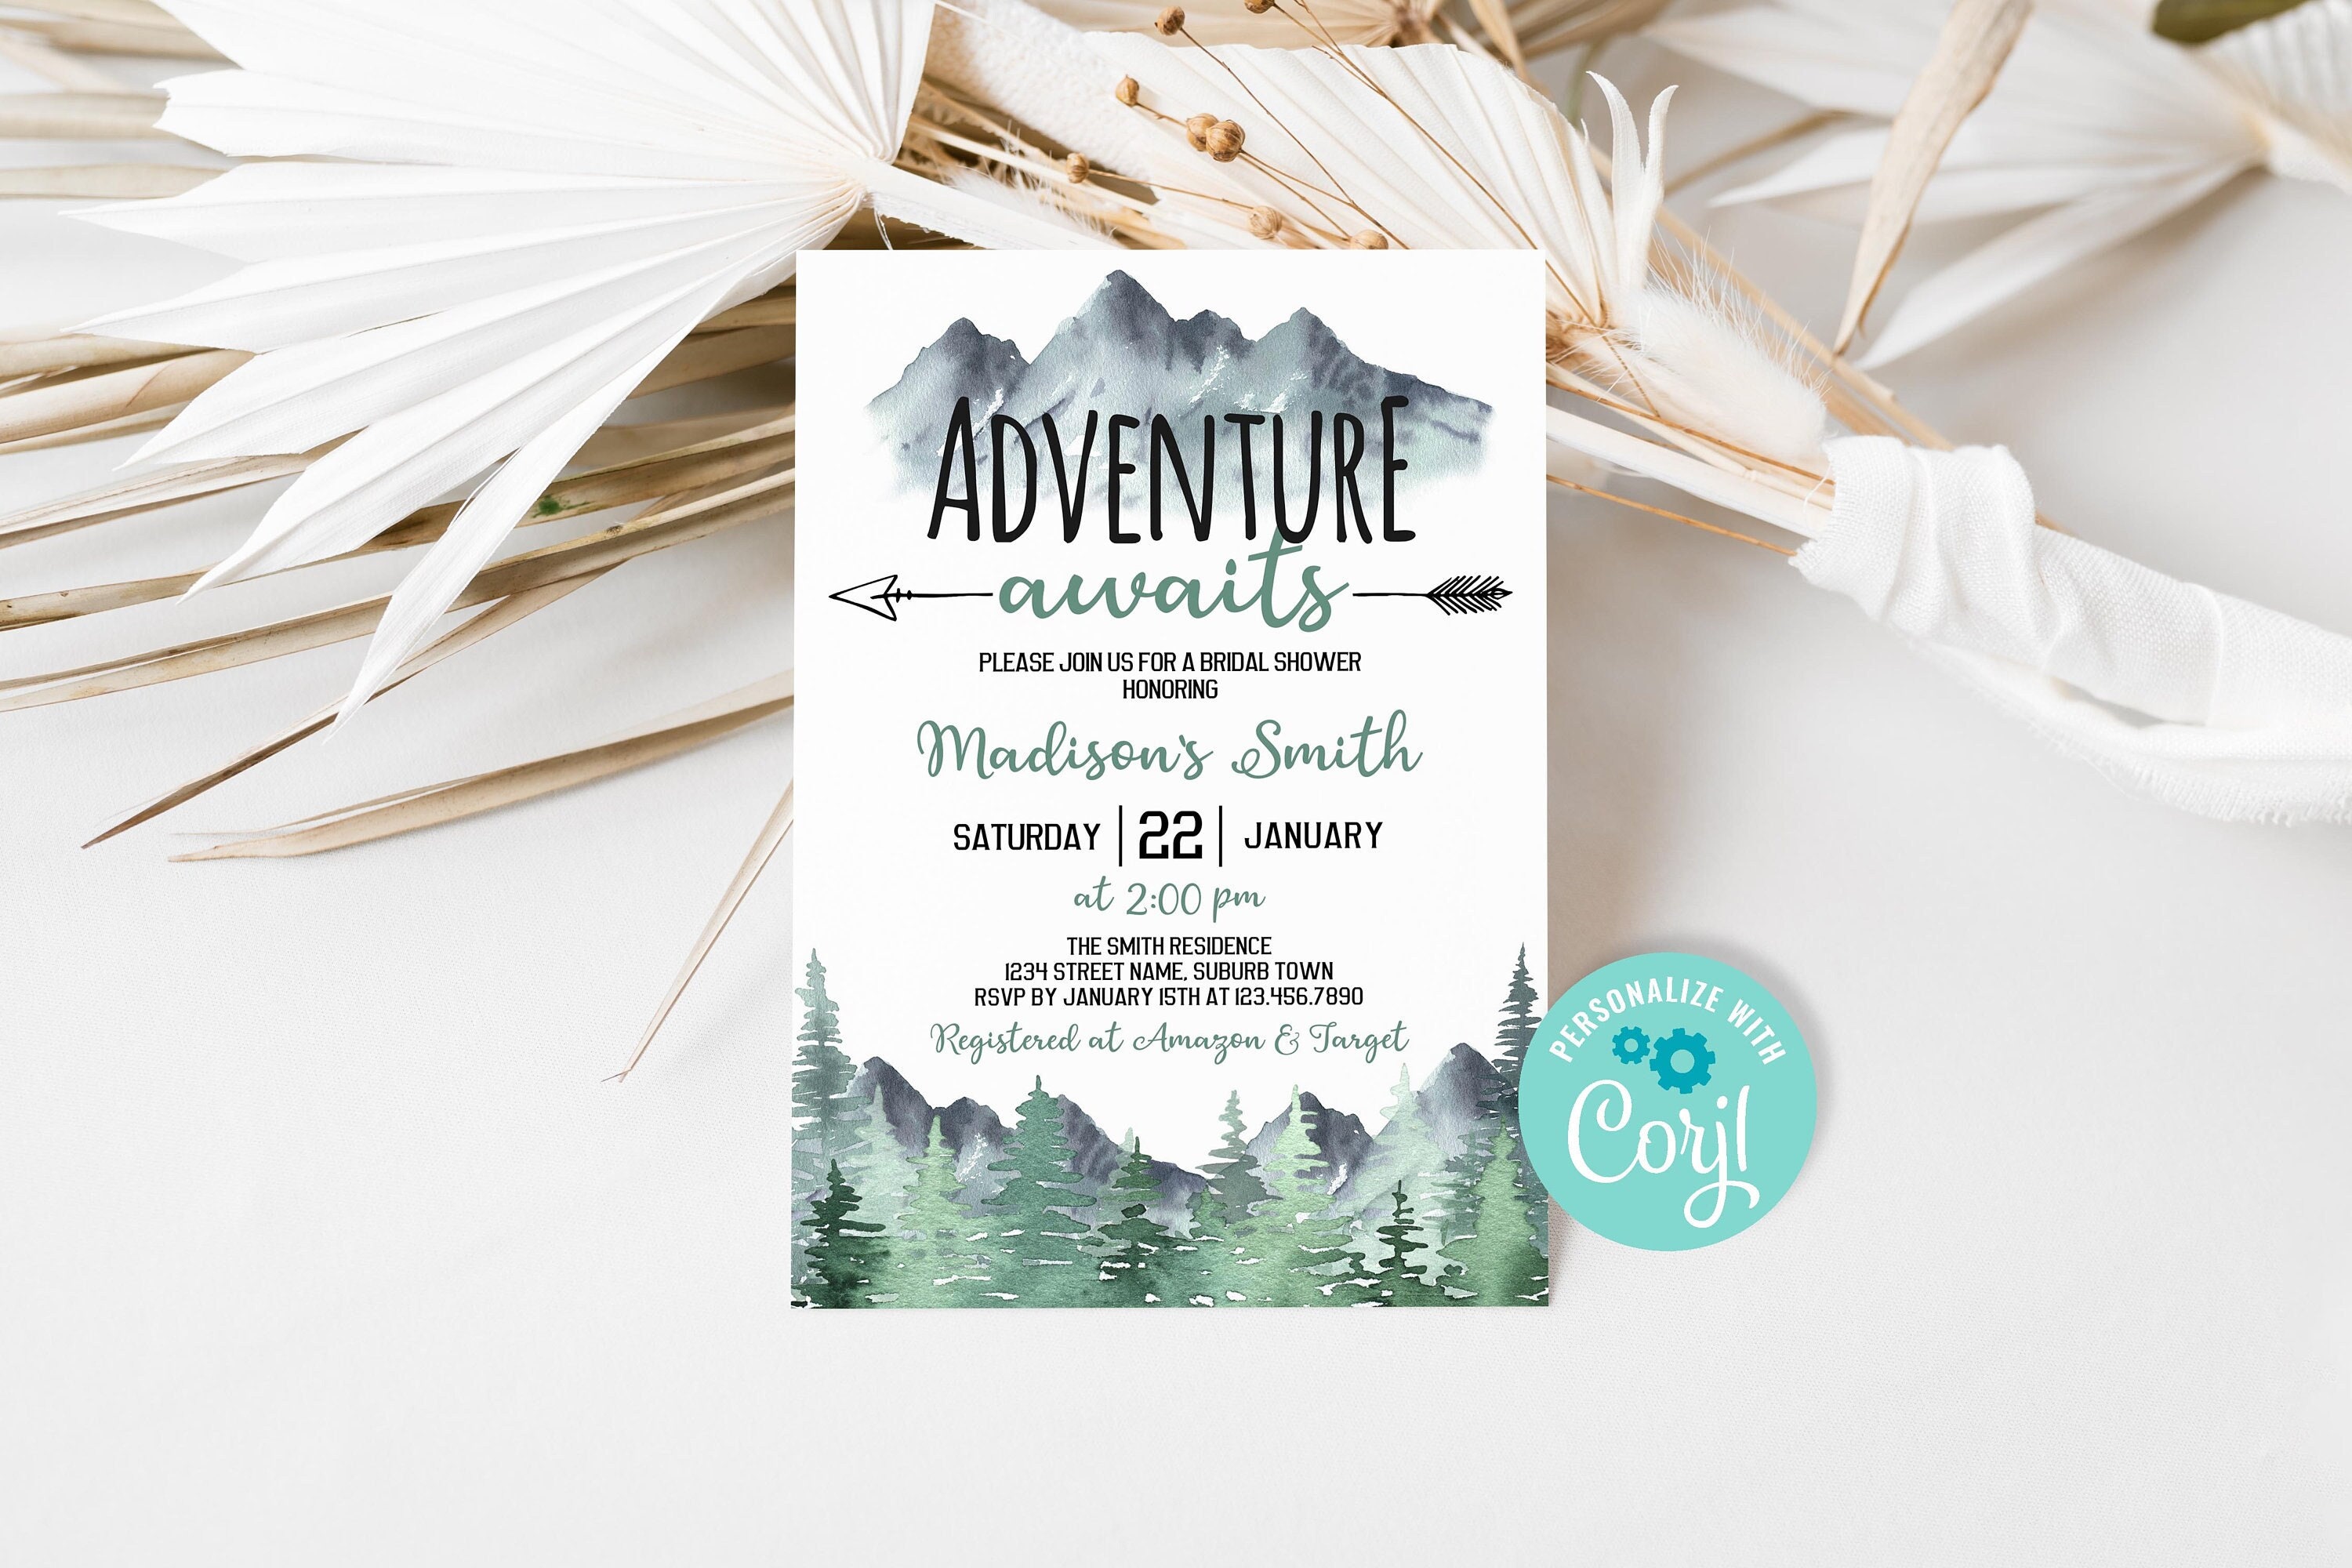 Our Adventure Book Custom Personalized up Scrapbook Photo Album, up Wedding  Guestbook, FREE CLIP ART 